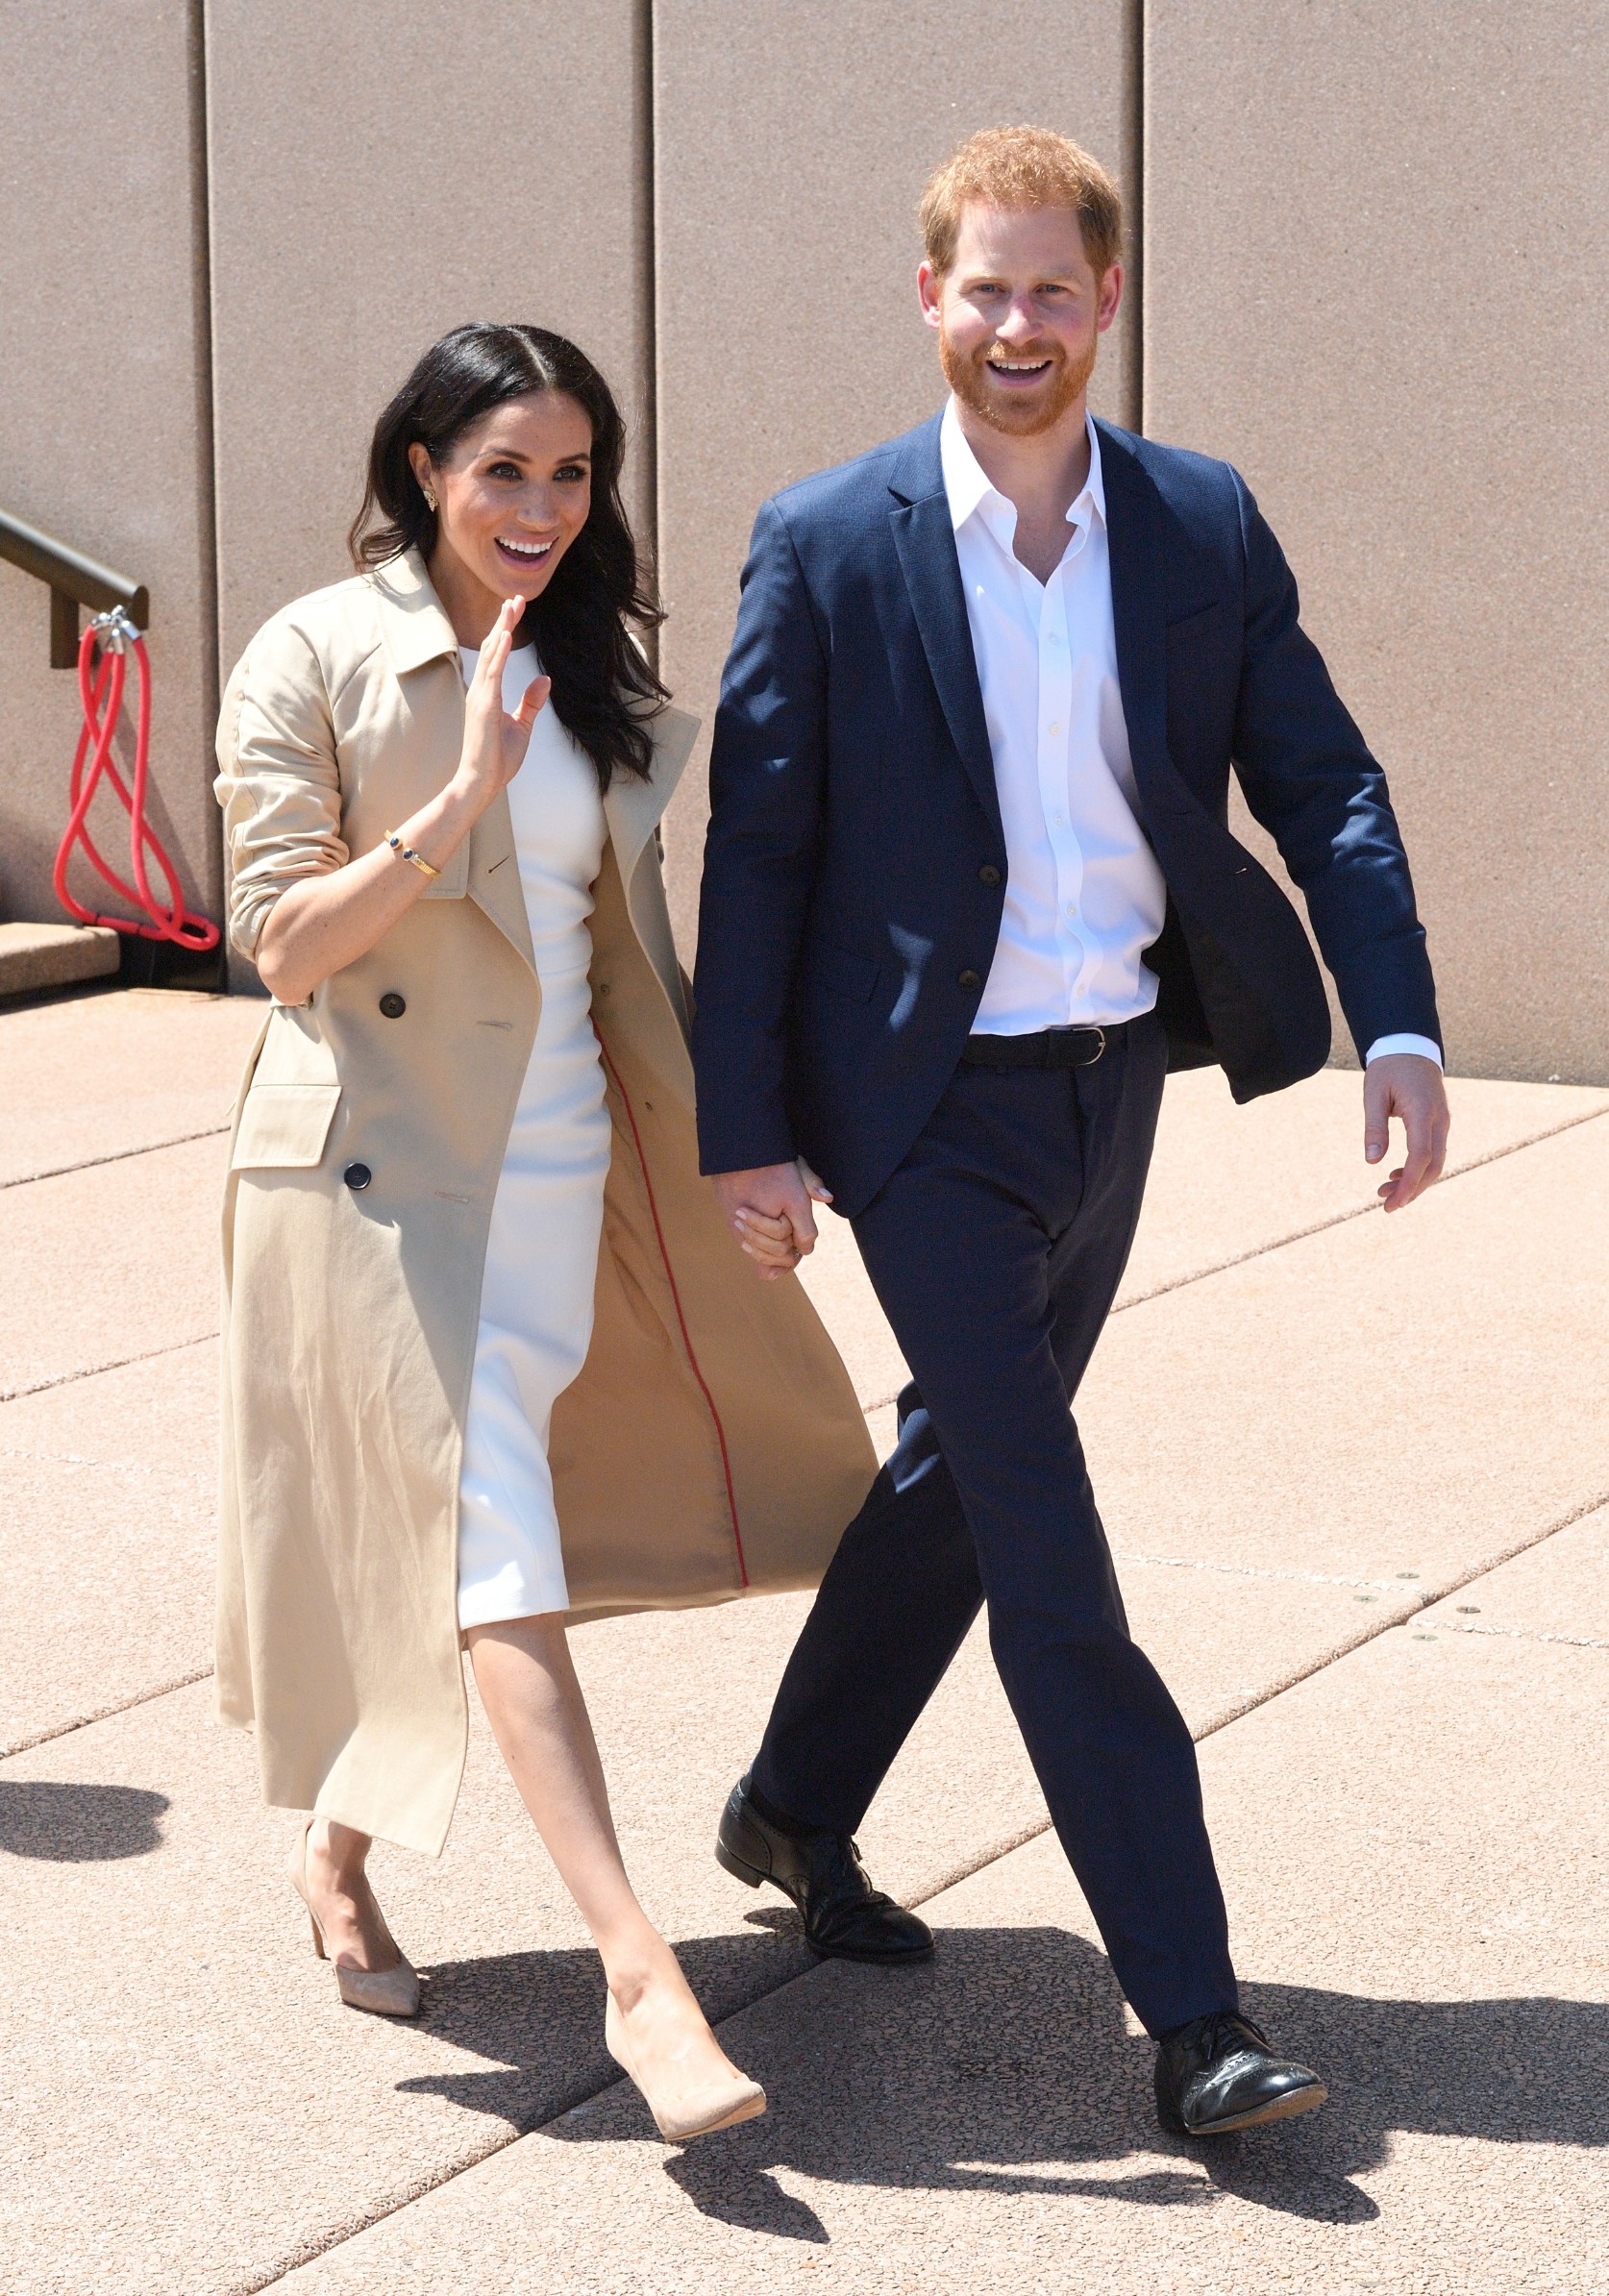 Prince Harry The Duke of Sussex and a pregnant Meghan Duchess of Sussex on a public walkabout at the Sydney Opera House.,Image: 391216541, License: Rights-managed, Restrictions: , Model Release: no, Credit line: Doug Peters / PA Images / Profimedia